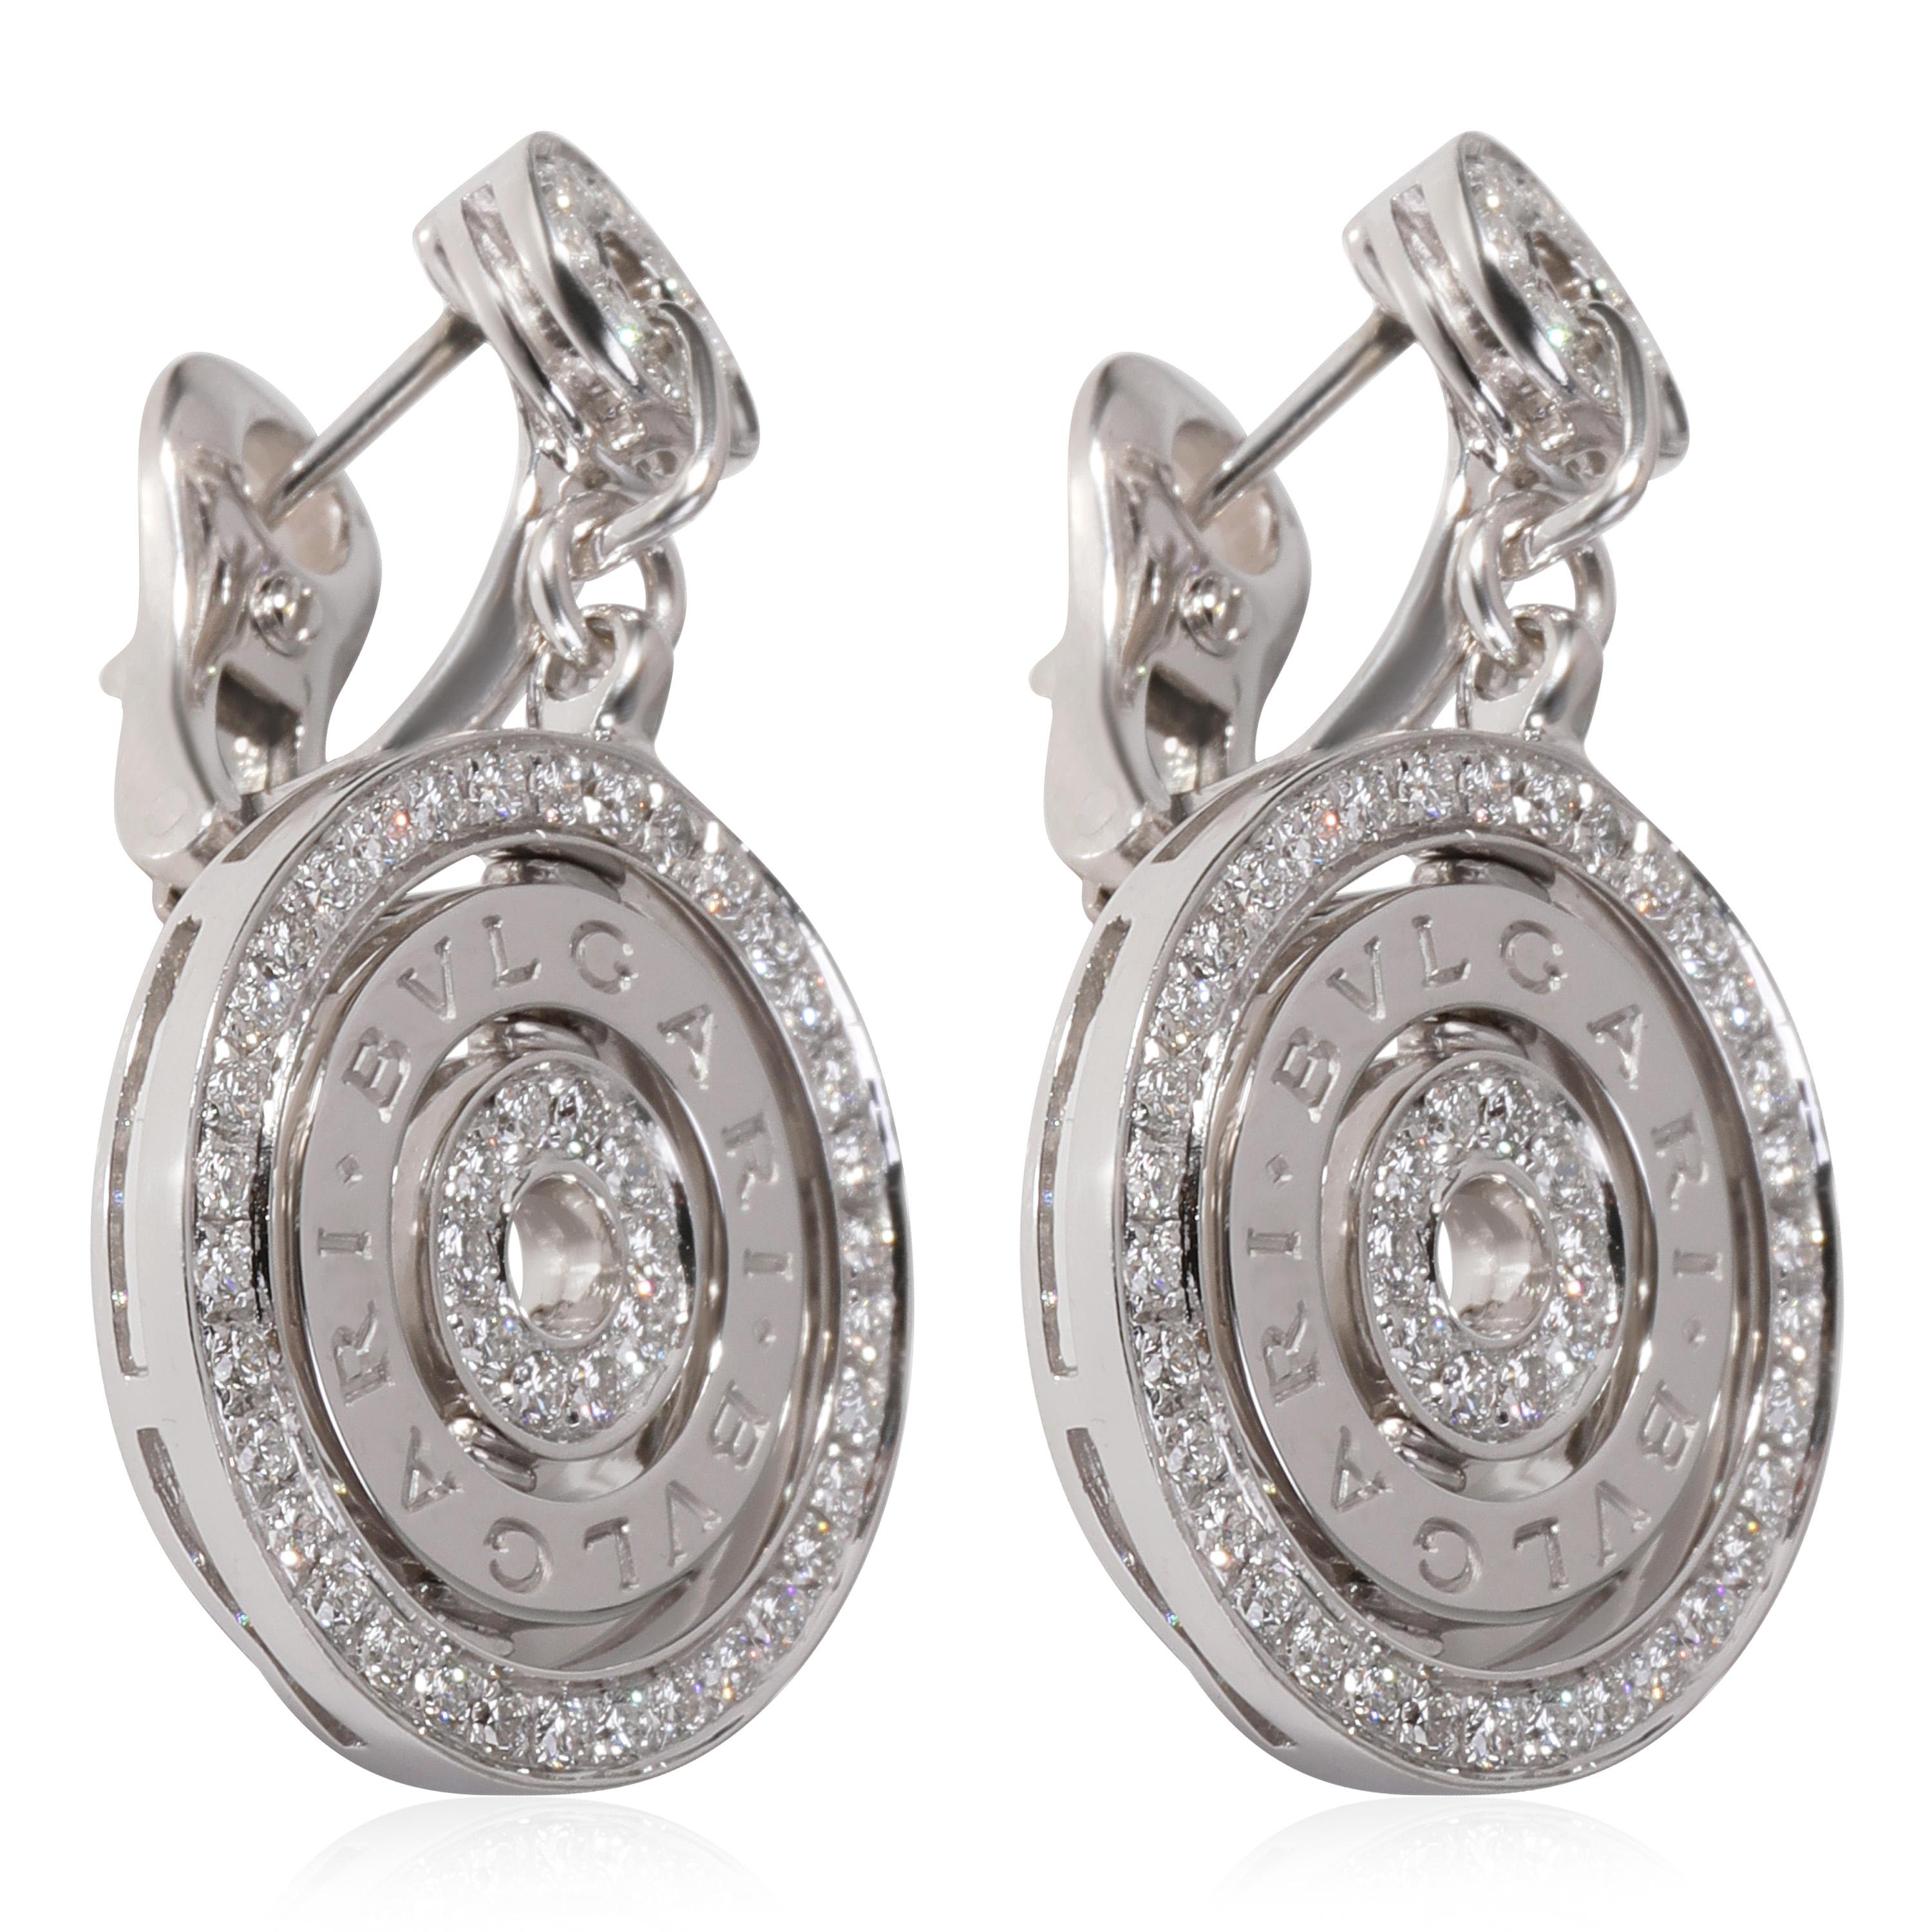 Bulgari Cerchi Astrale Diamond Earrings in 18k White Gold 1.3 CTW

PRIMARY DETAILS
SKU: 119155
Listing Title: Bulgari Cerchi Astrale Diamond Earrings in 18k White Gold 1.3 CTW
Condition Description: Retails for 15000 USD. In excellent condition and